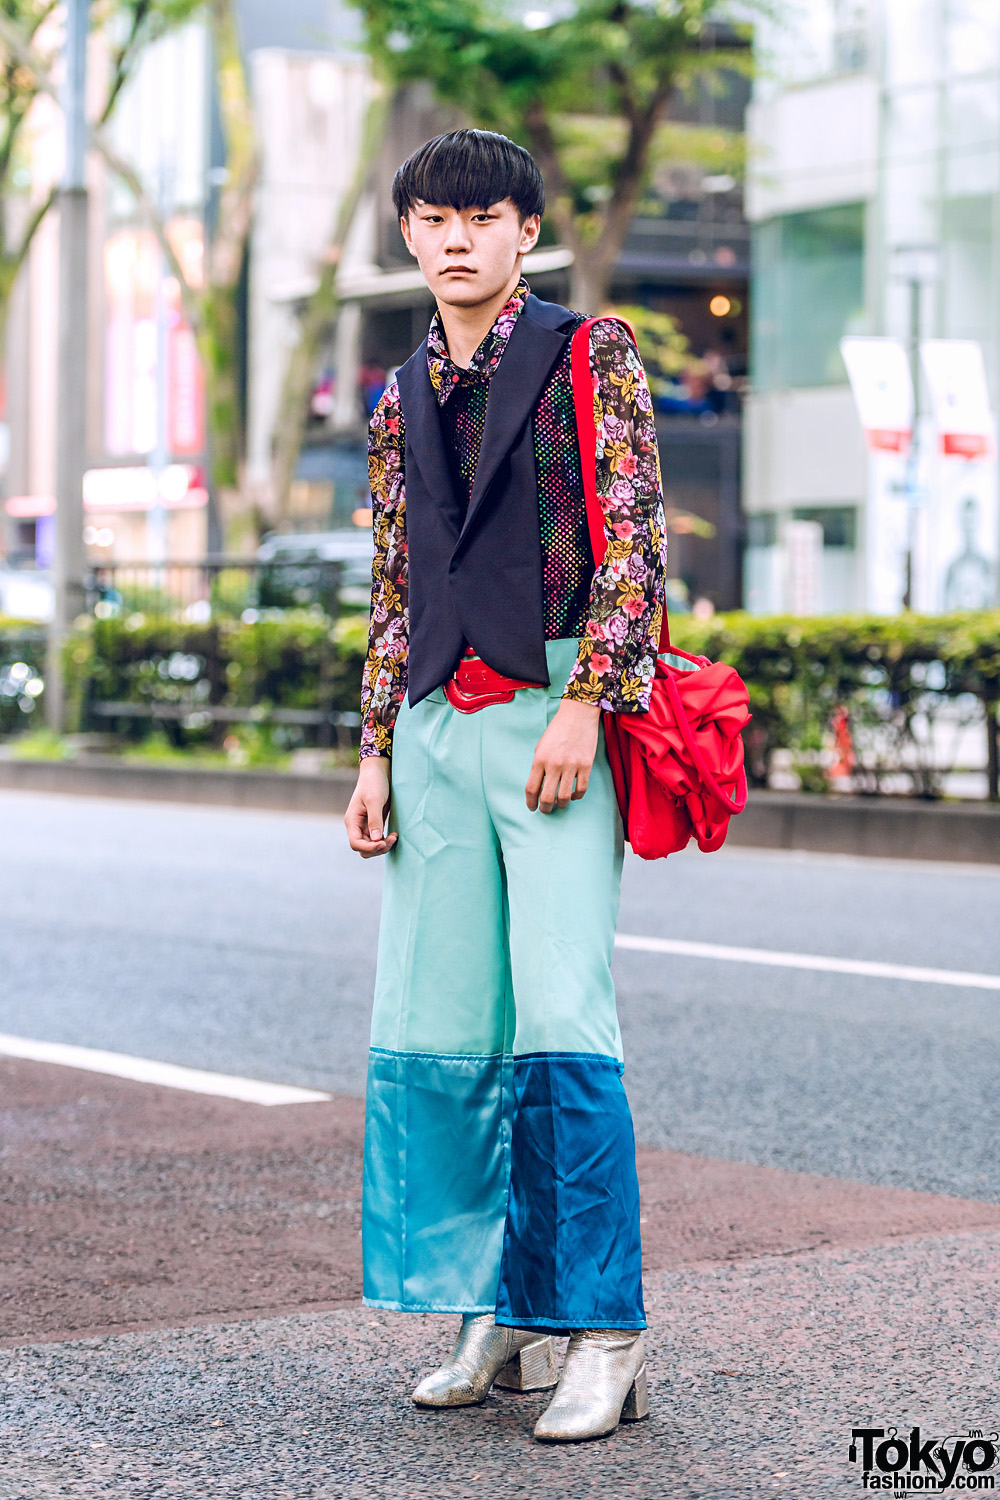 Japanese Eclectic Street Style w/ Floral Print Shirt, Shin Mesh 